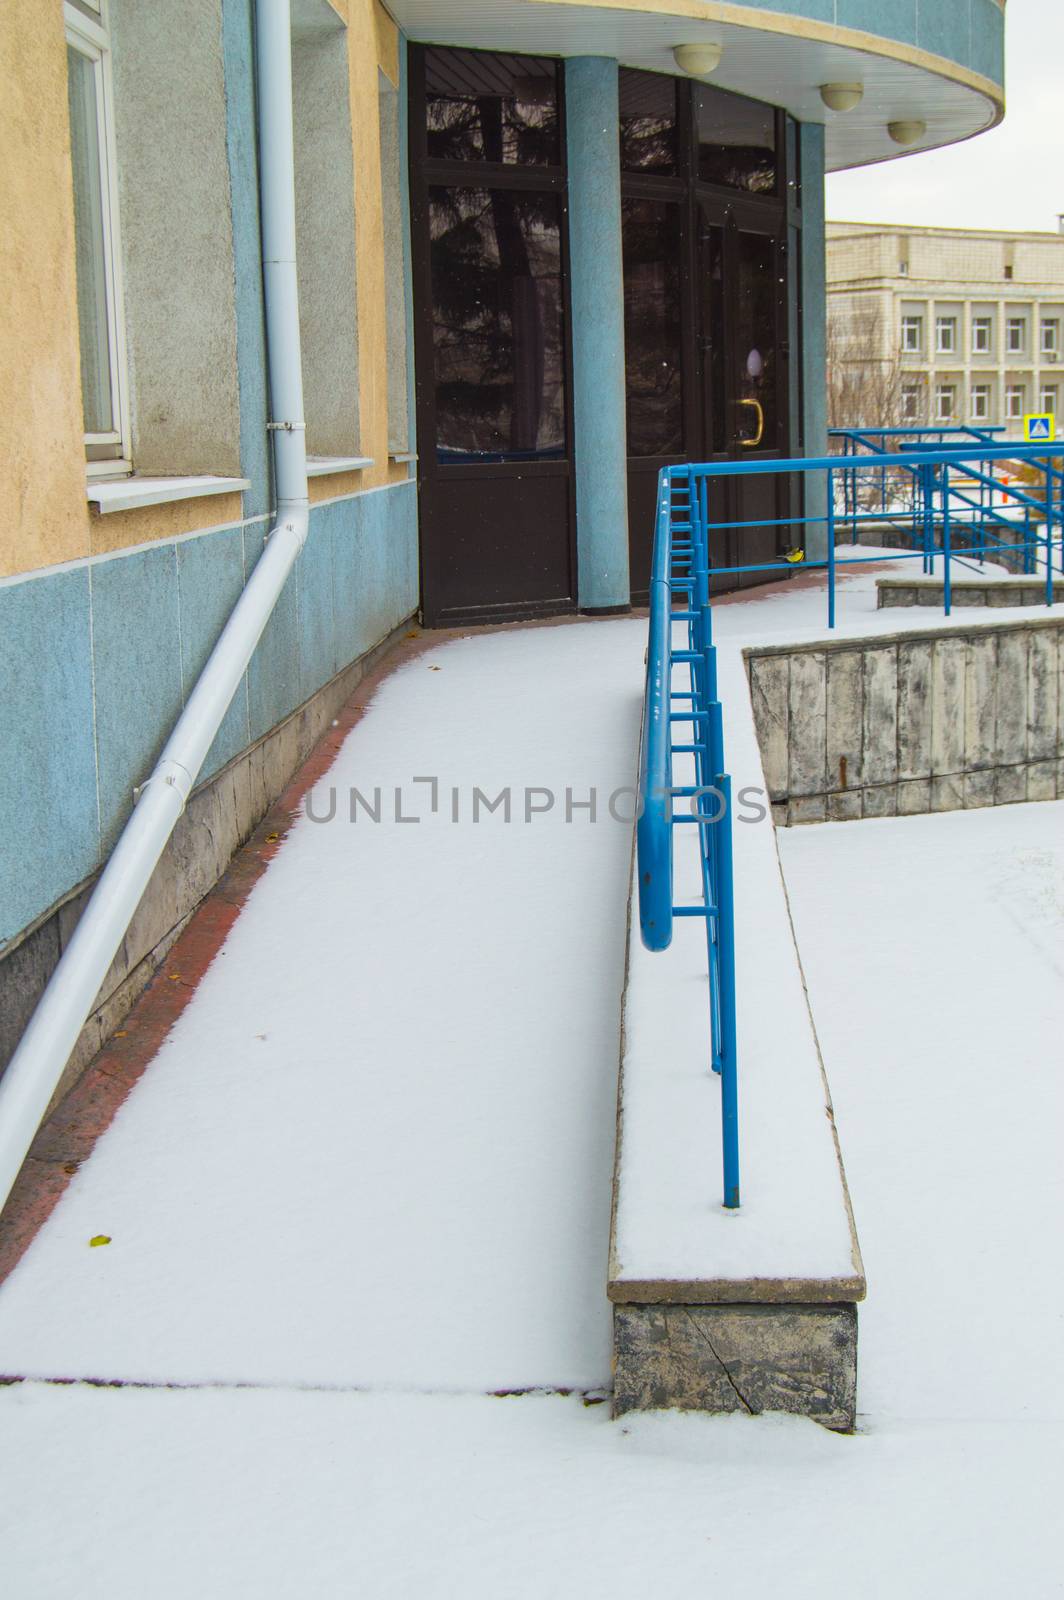 The ramp is covered with the first snow installed for the movement of people with disabilities at any time of the year by claire_lucia